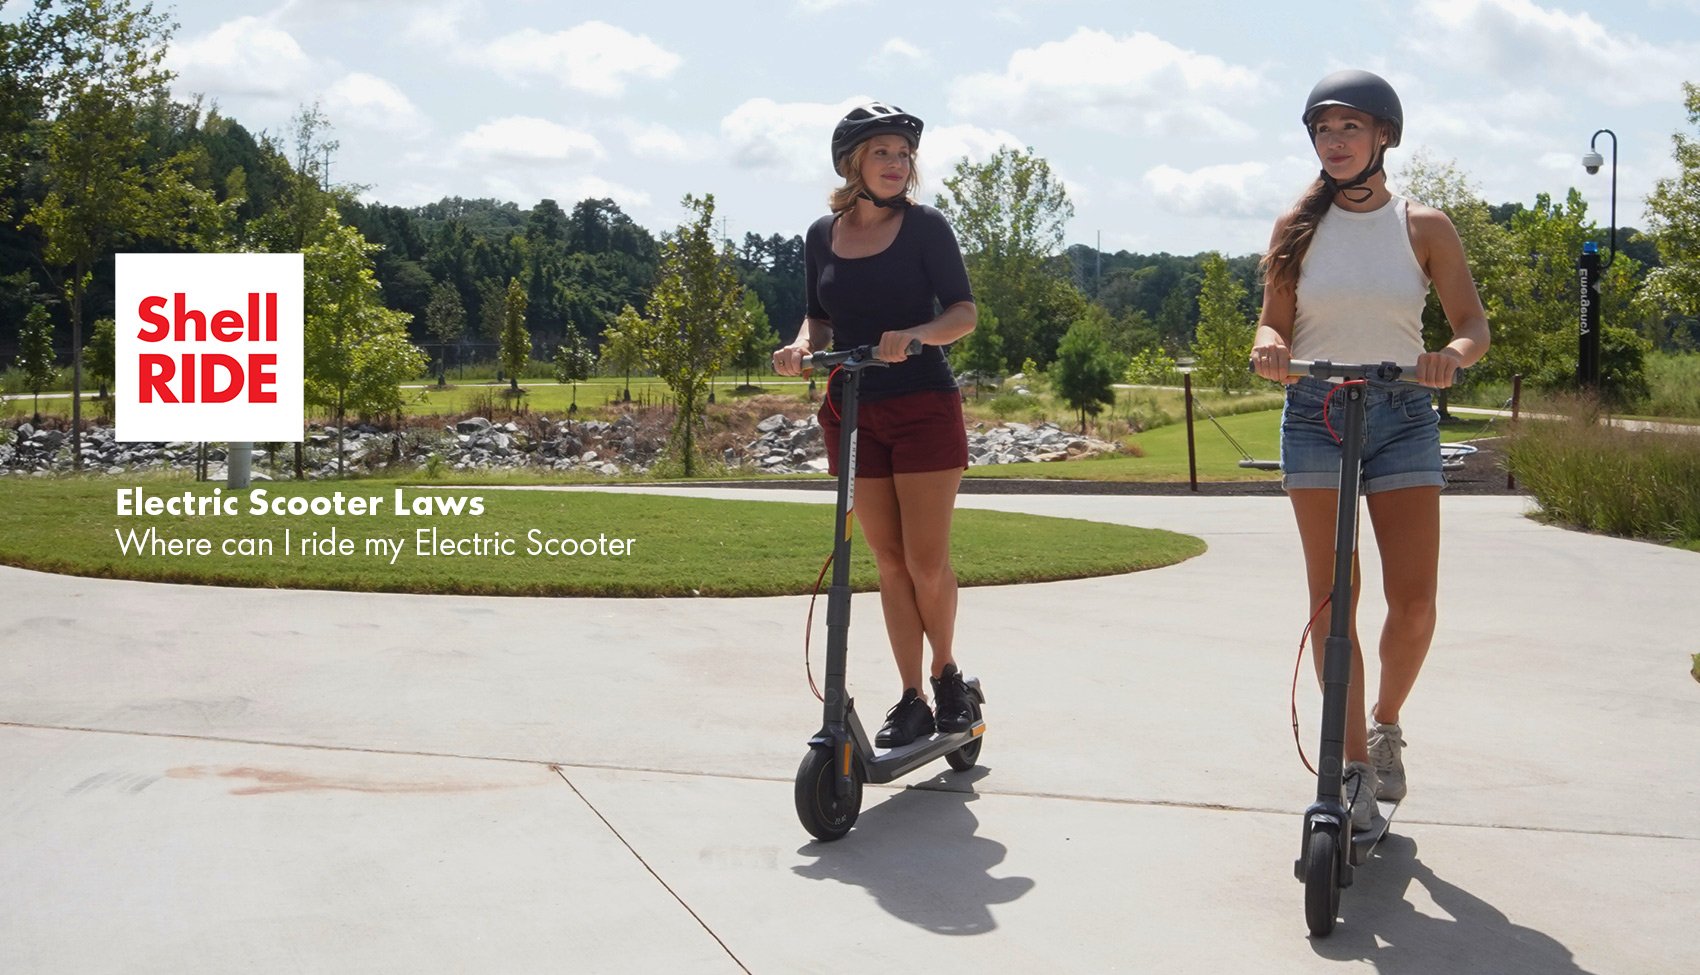 electric scooter laws blog image with two women riding electric scooters in a park